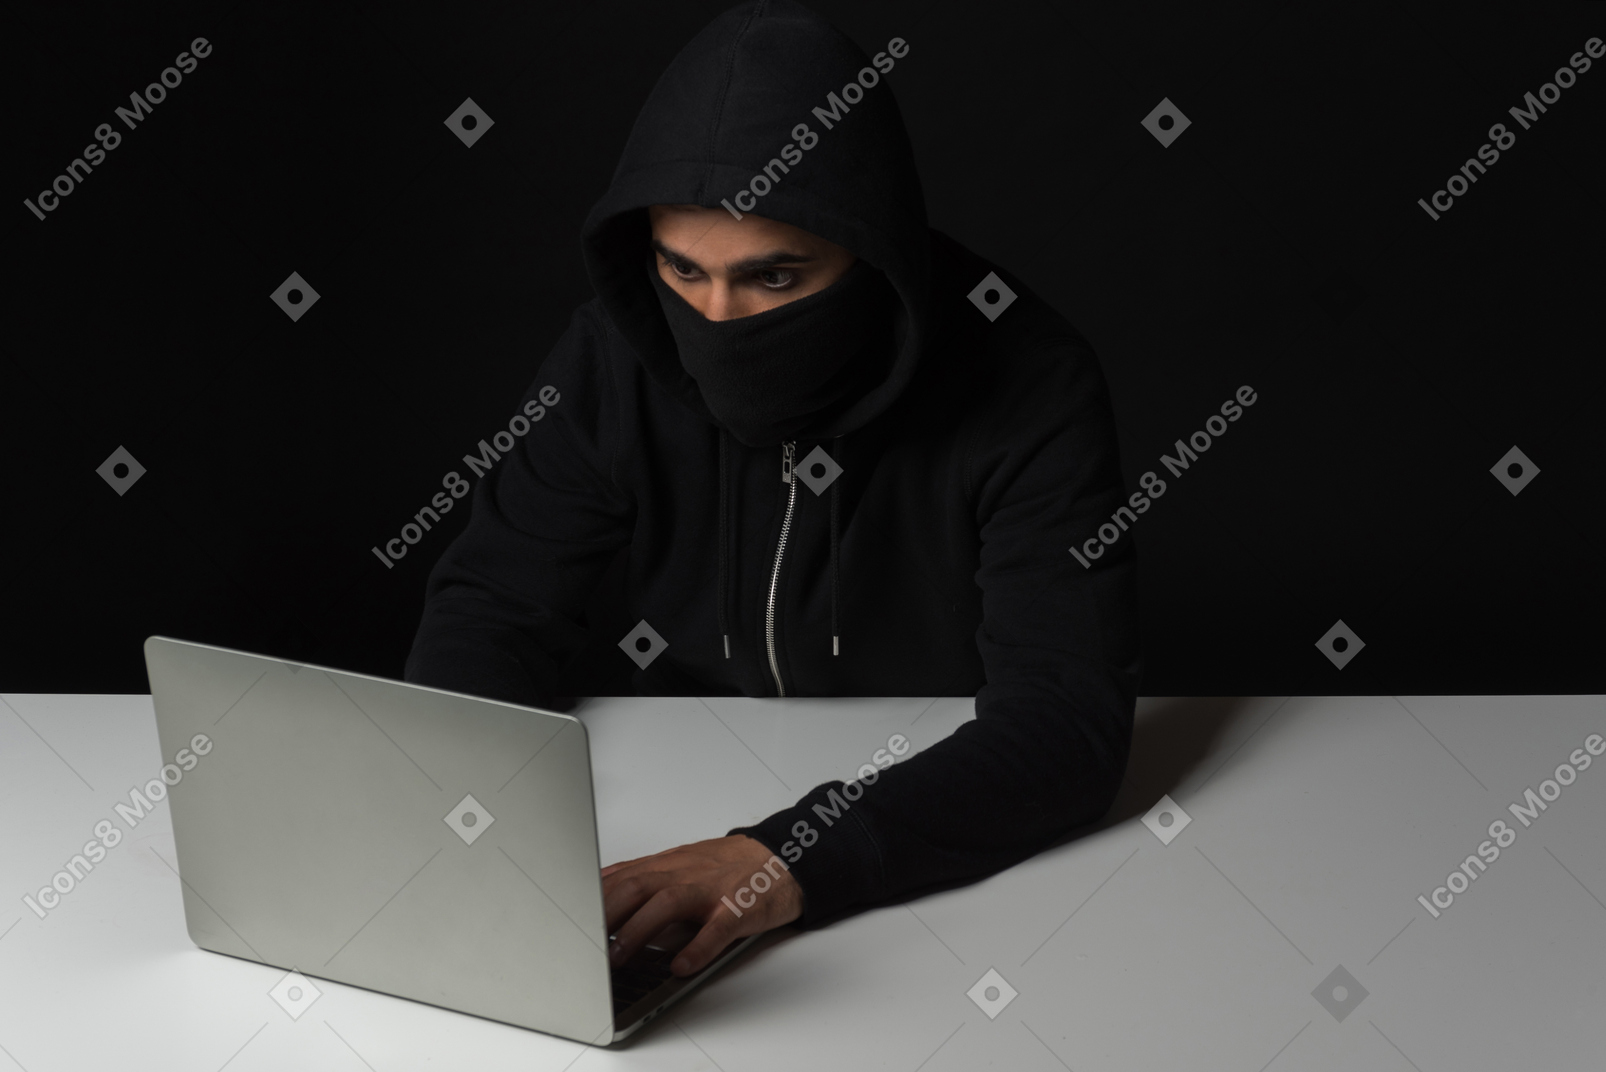 Hacker guy sitting at the table and working on laptop in the dark